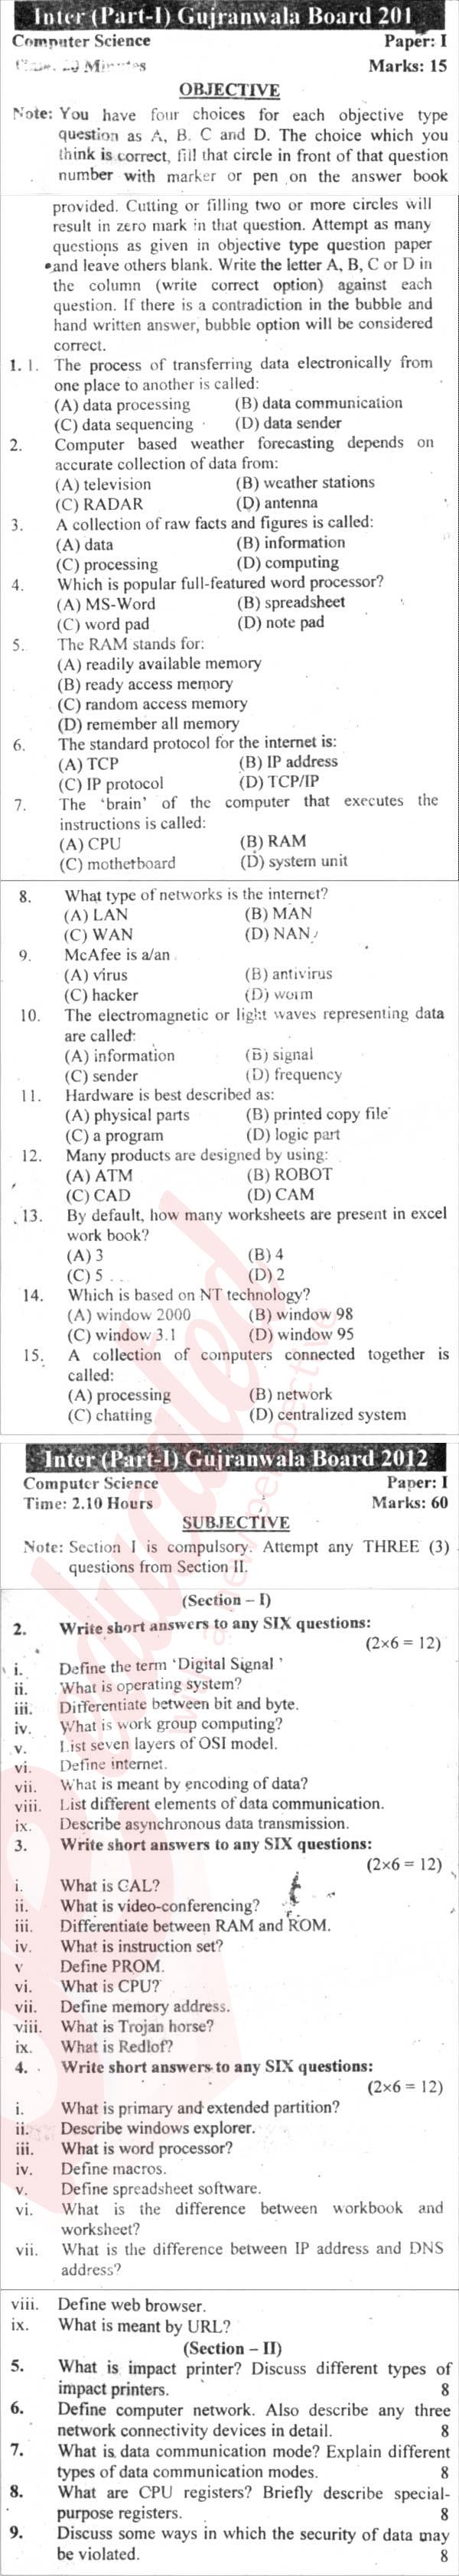 Computer Science ICS Part 1 Past Paper Group 1 BISE Gujranwala 2012